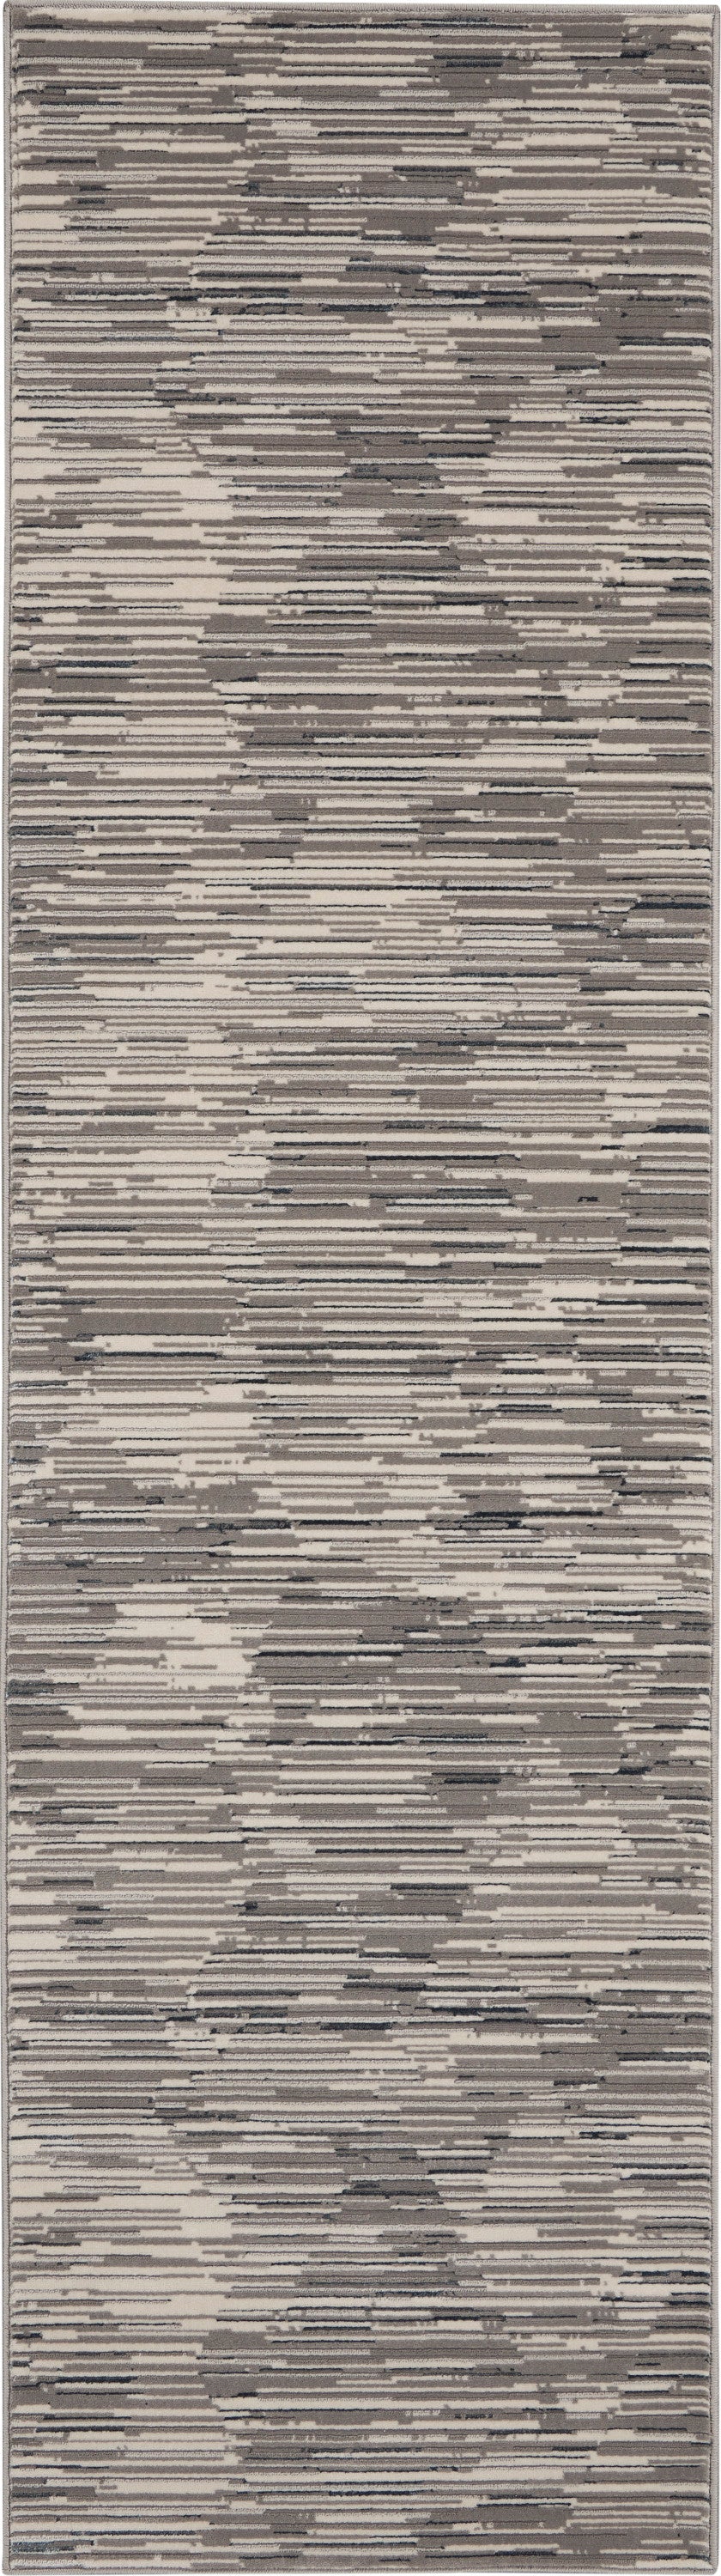 Michael Amini MA90 Uptown UPT01 Grey Ivory Contemporary Machinemade Rug